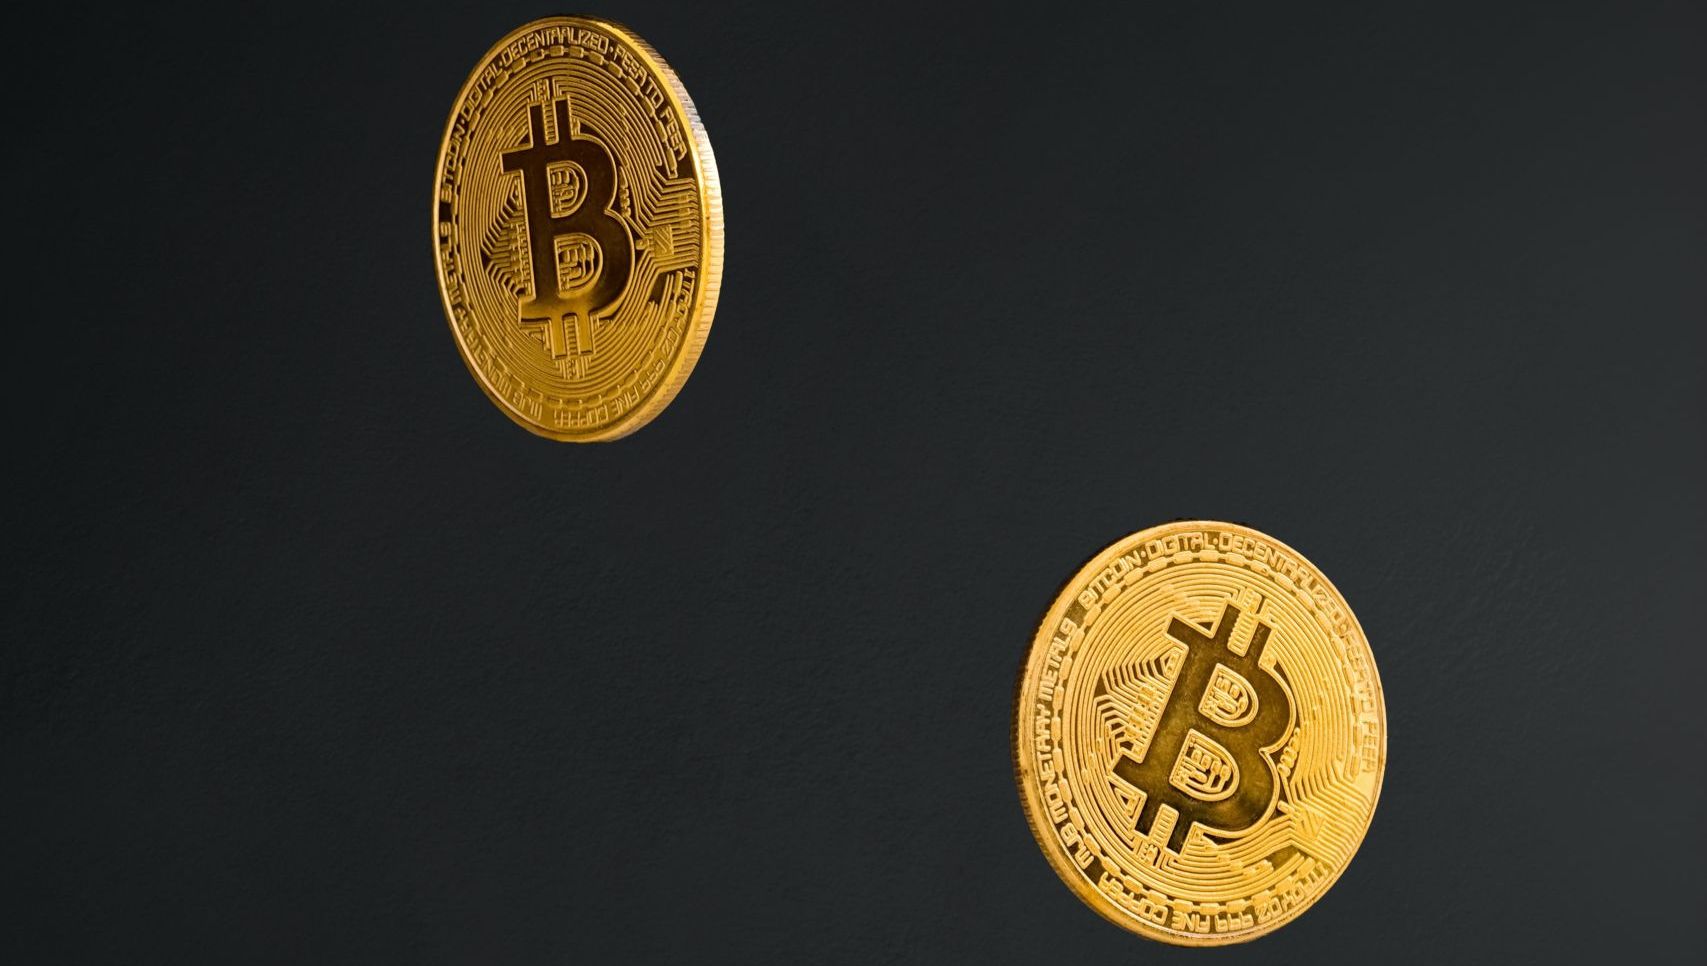 Image showing Bitcoin, which is a type of cryptocurrency